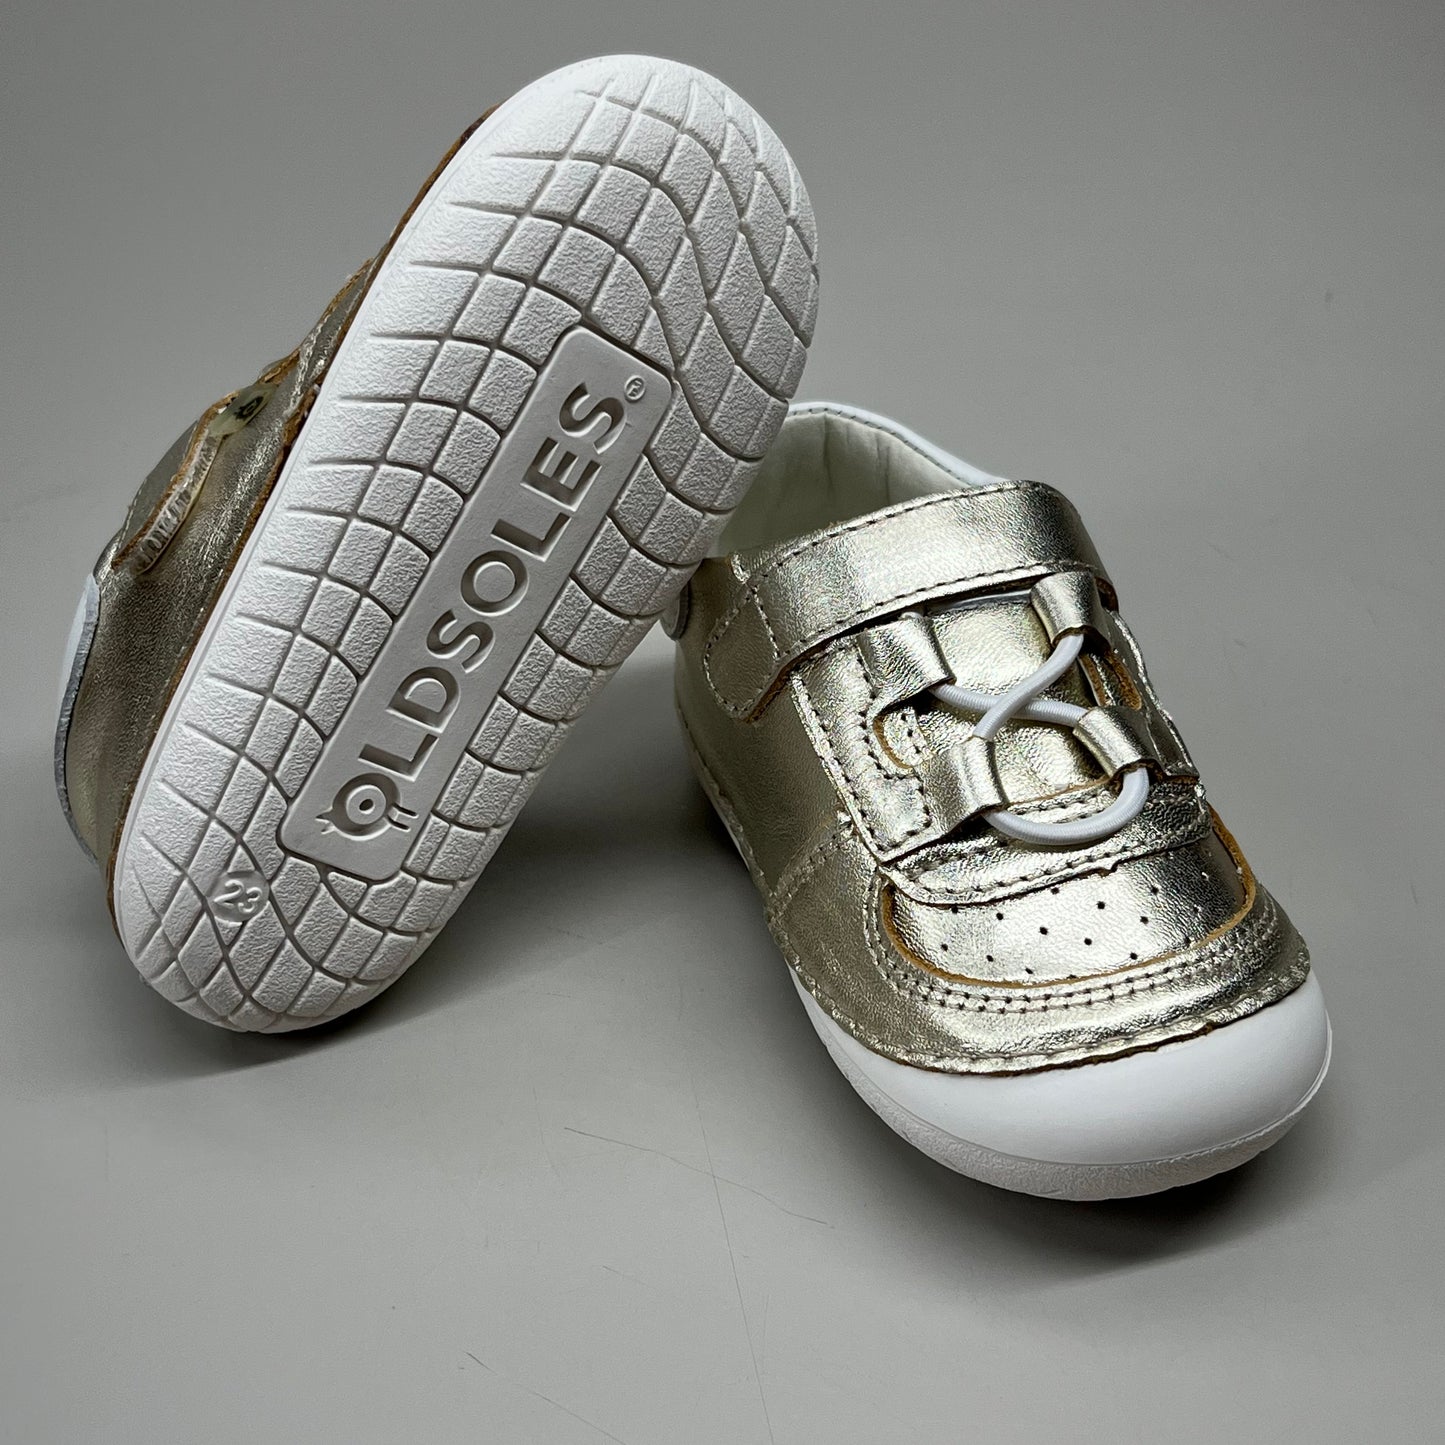 OLD SOLES Baby Rebel Pave Leather Shoe Sz 21 US 5 Gold/White #4090